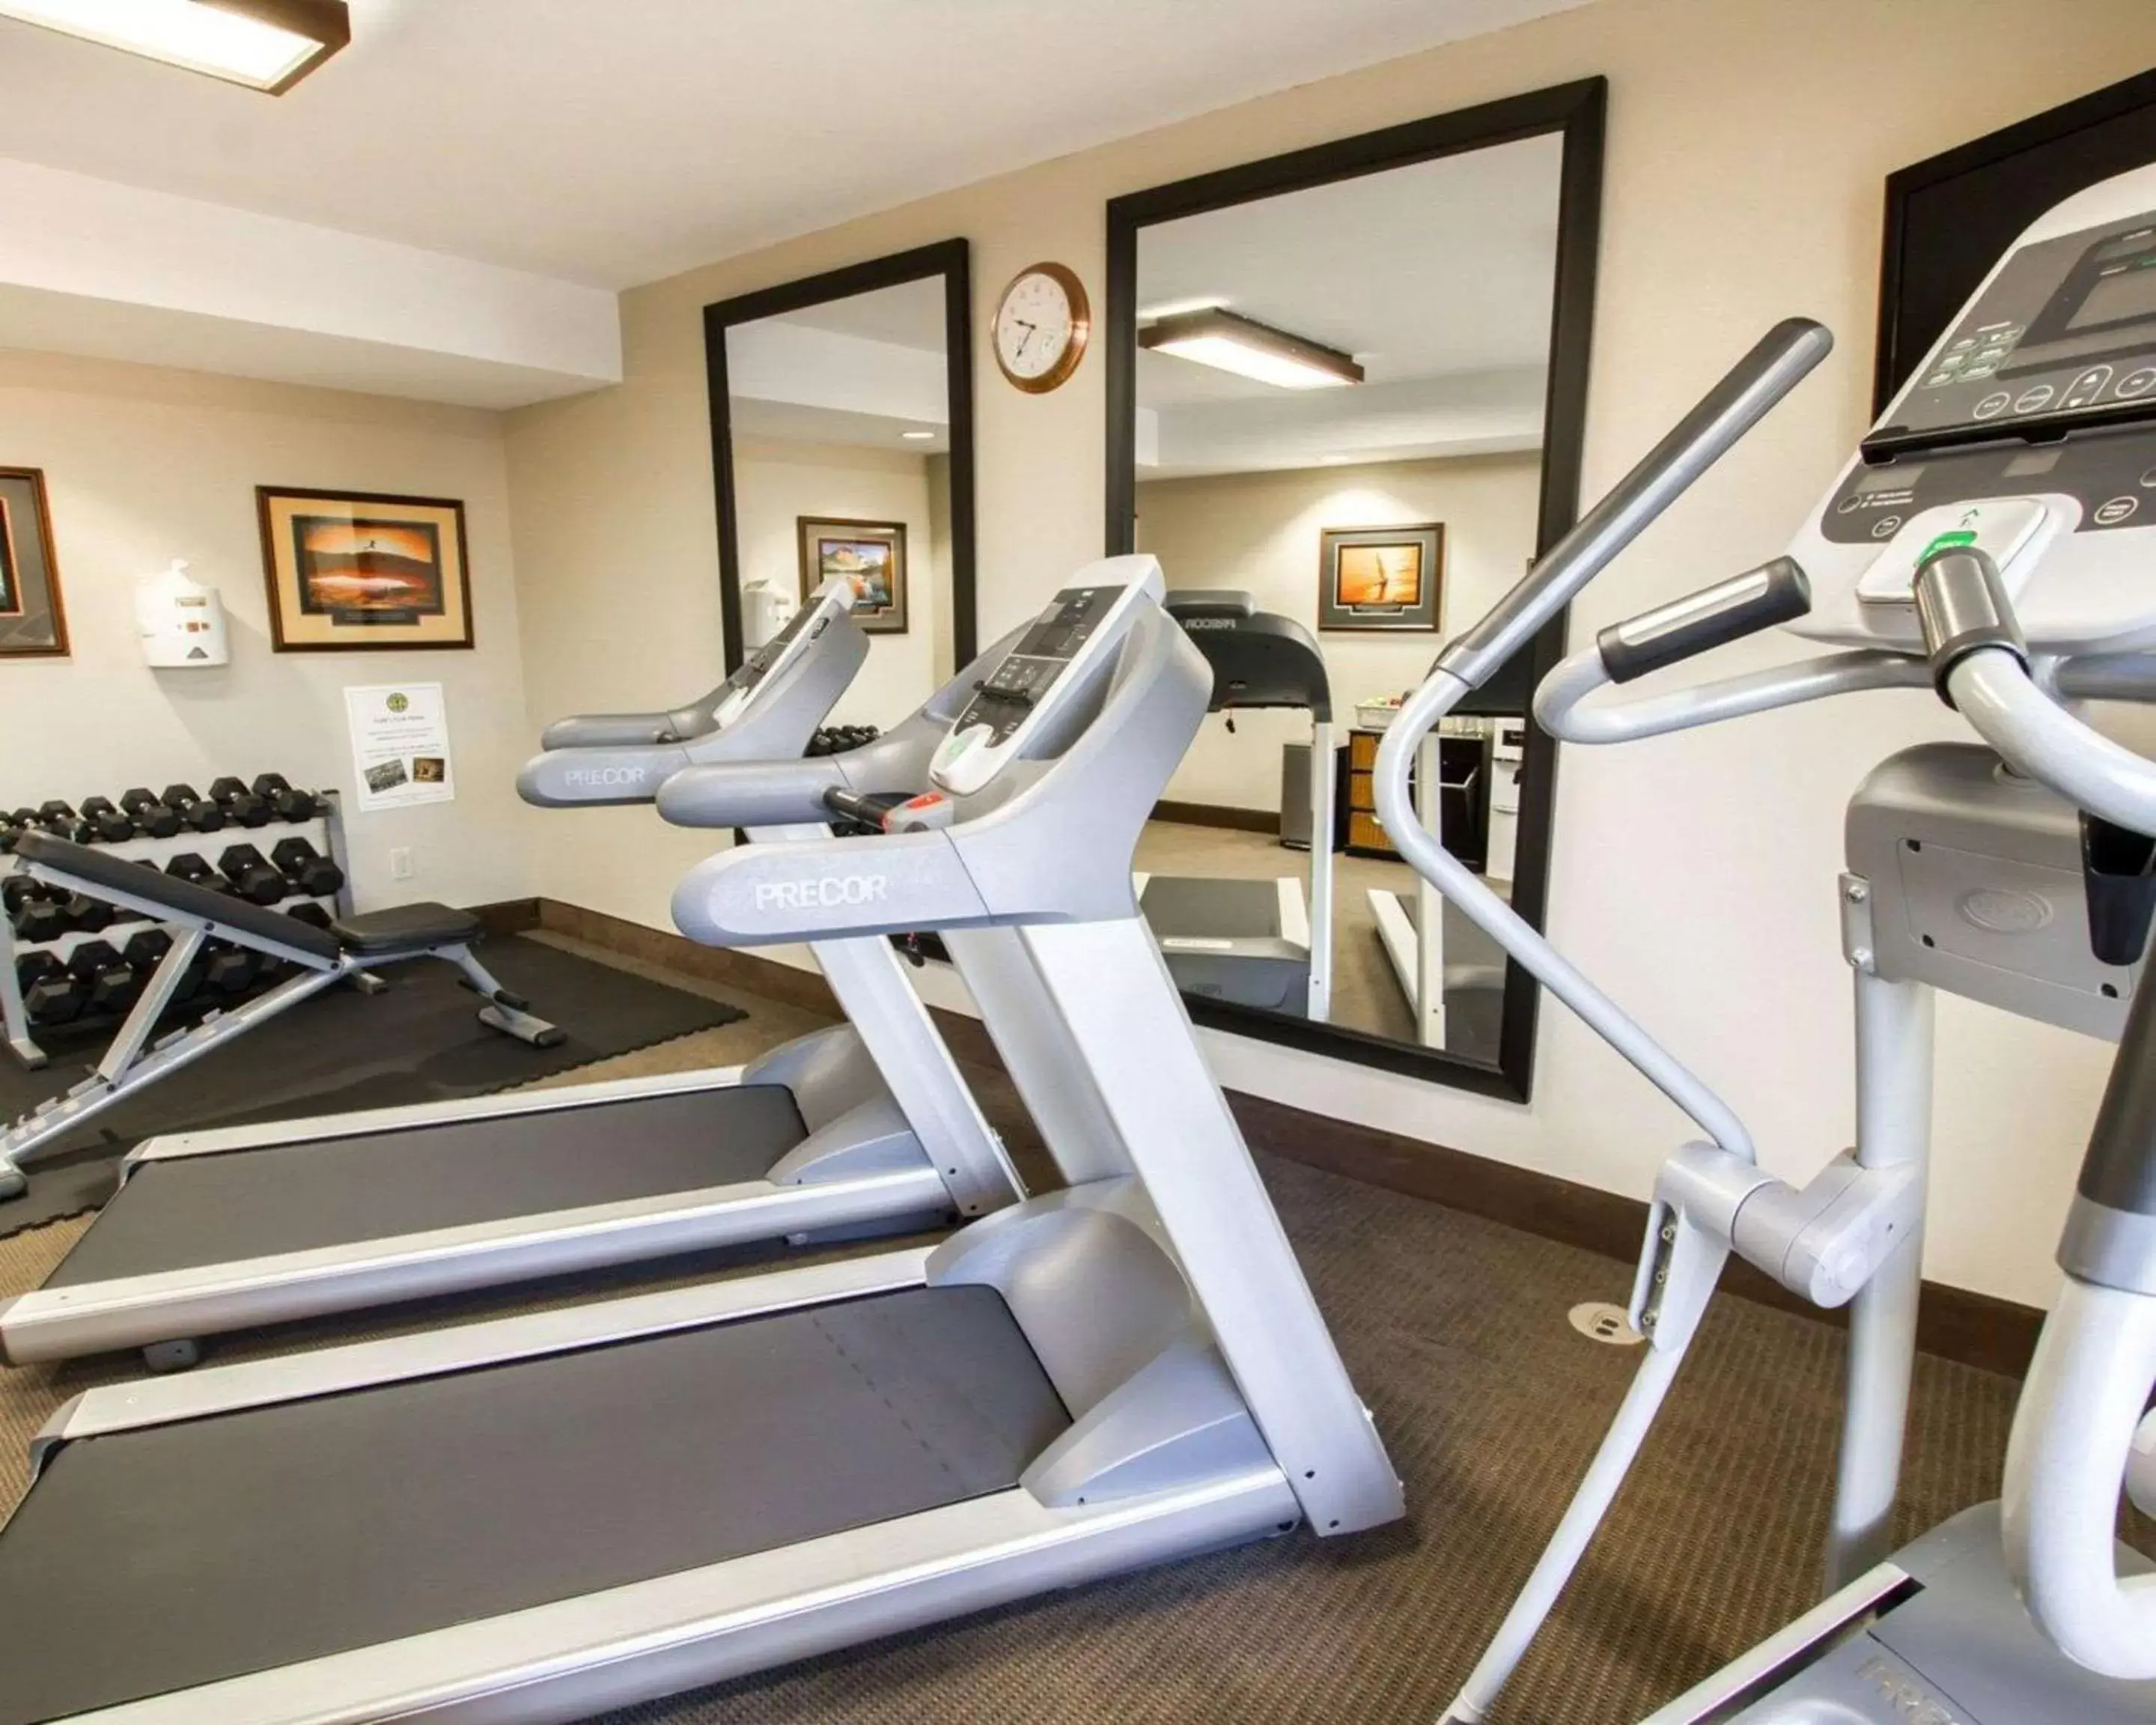 Fitness centre/facilities, Fitness Center/Facilities in Sleep Inn at North Scottsdale Road